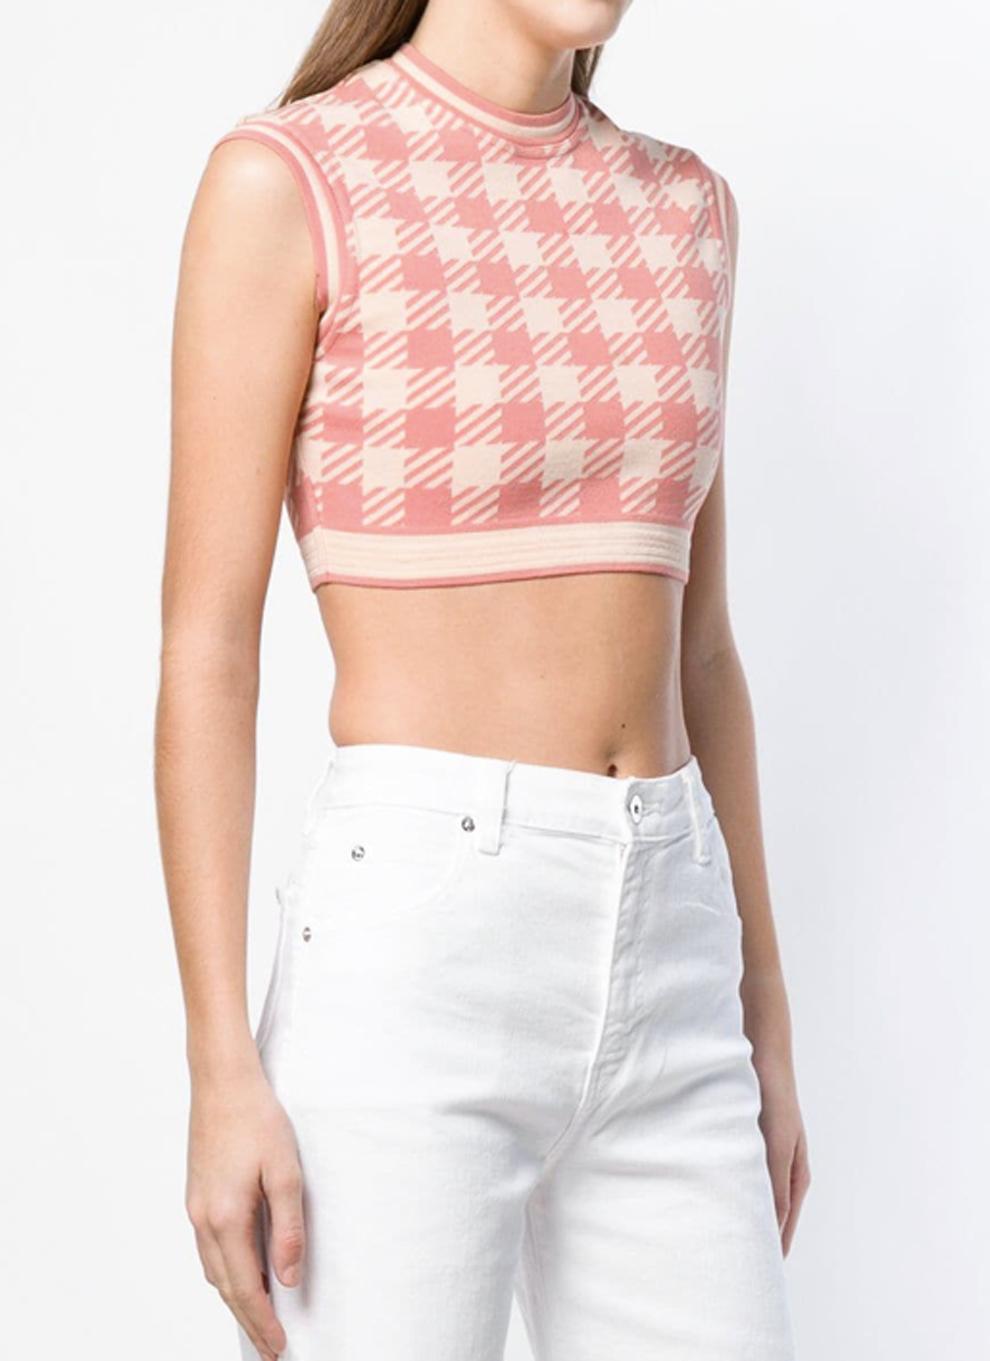  Azzedine Alaia  iconic S/S 1991 Tati top featuring a cropped shape, an ivory & pink print houndstooth pattern. An iconic piece from the collaboration between Alaïa and the legendary Parisian 'high street' brand. 
See catwalk & Azzedine Alaïa book-